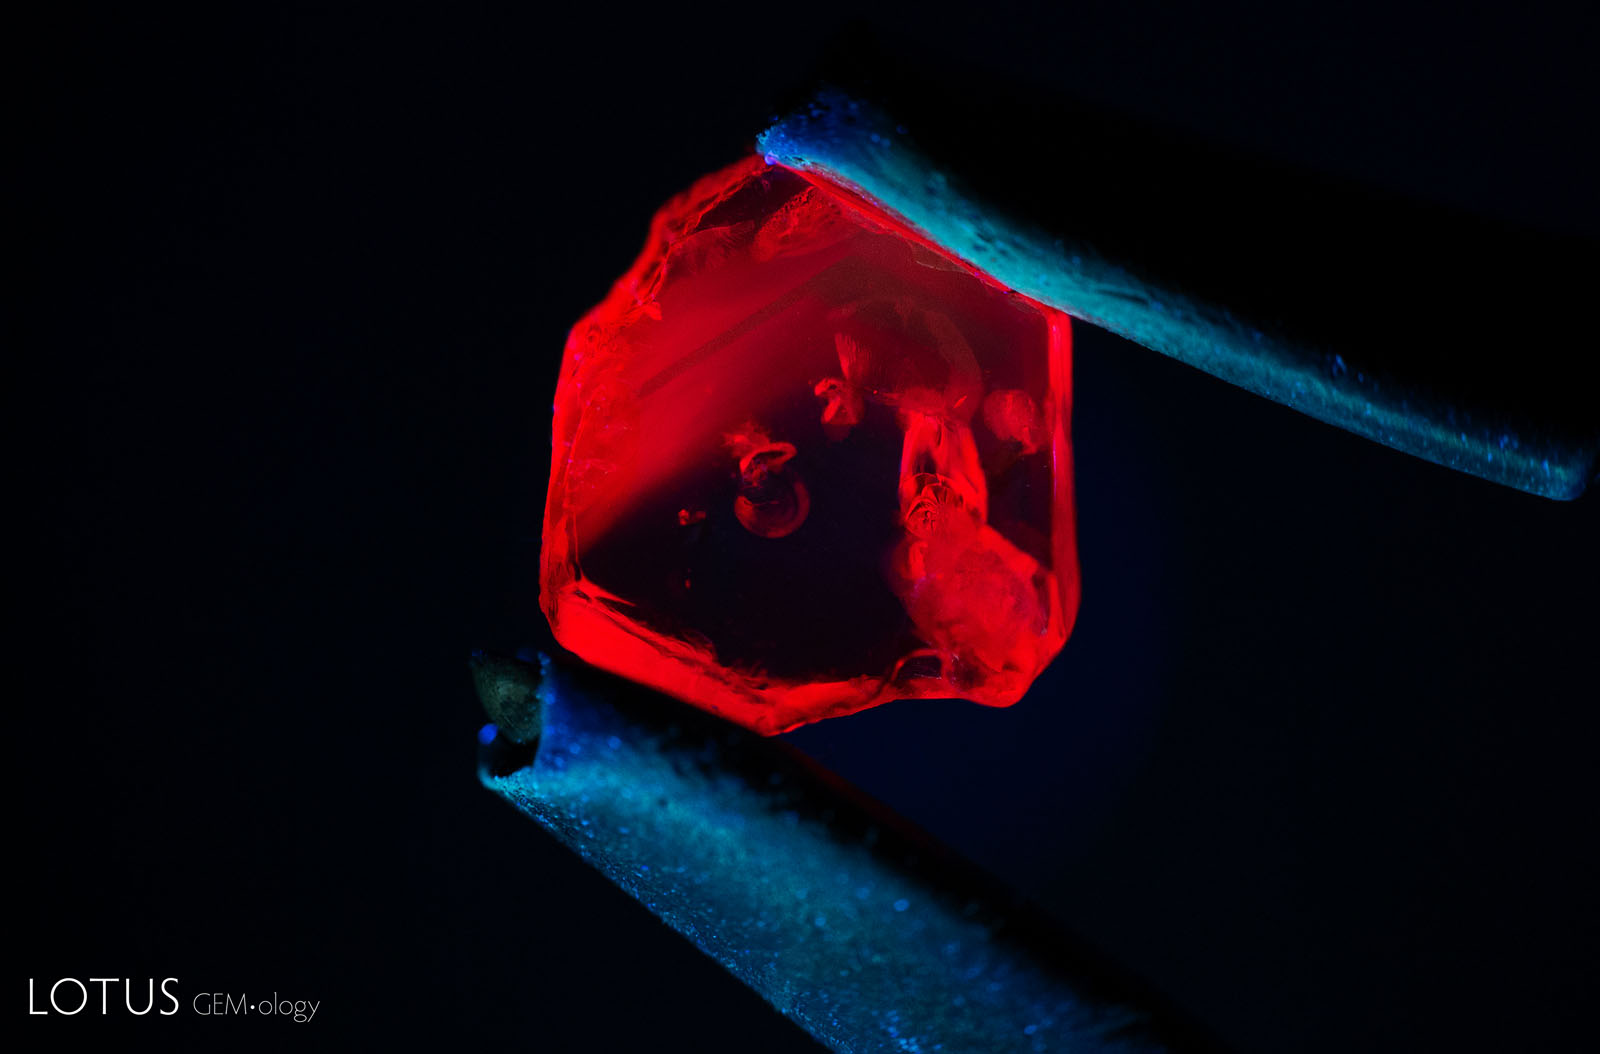 After heating to 1500°C, the sample continues to display strong red fluorescence in long-wave UV. The area on the right with more visible red fluorescence is due to light striking inclusions that have altered, rather than a change in the stone’s bodycolor.